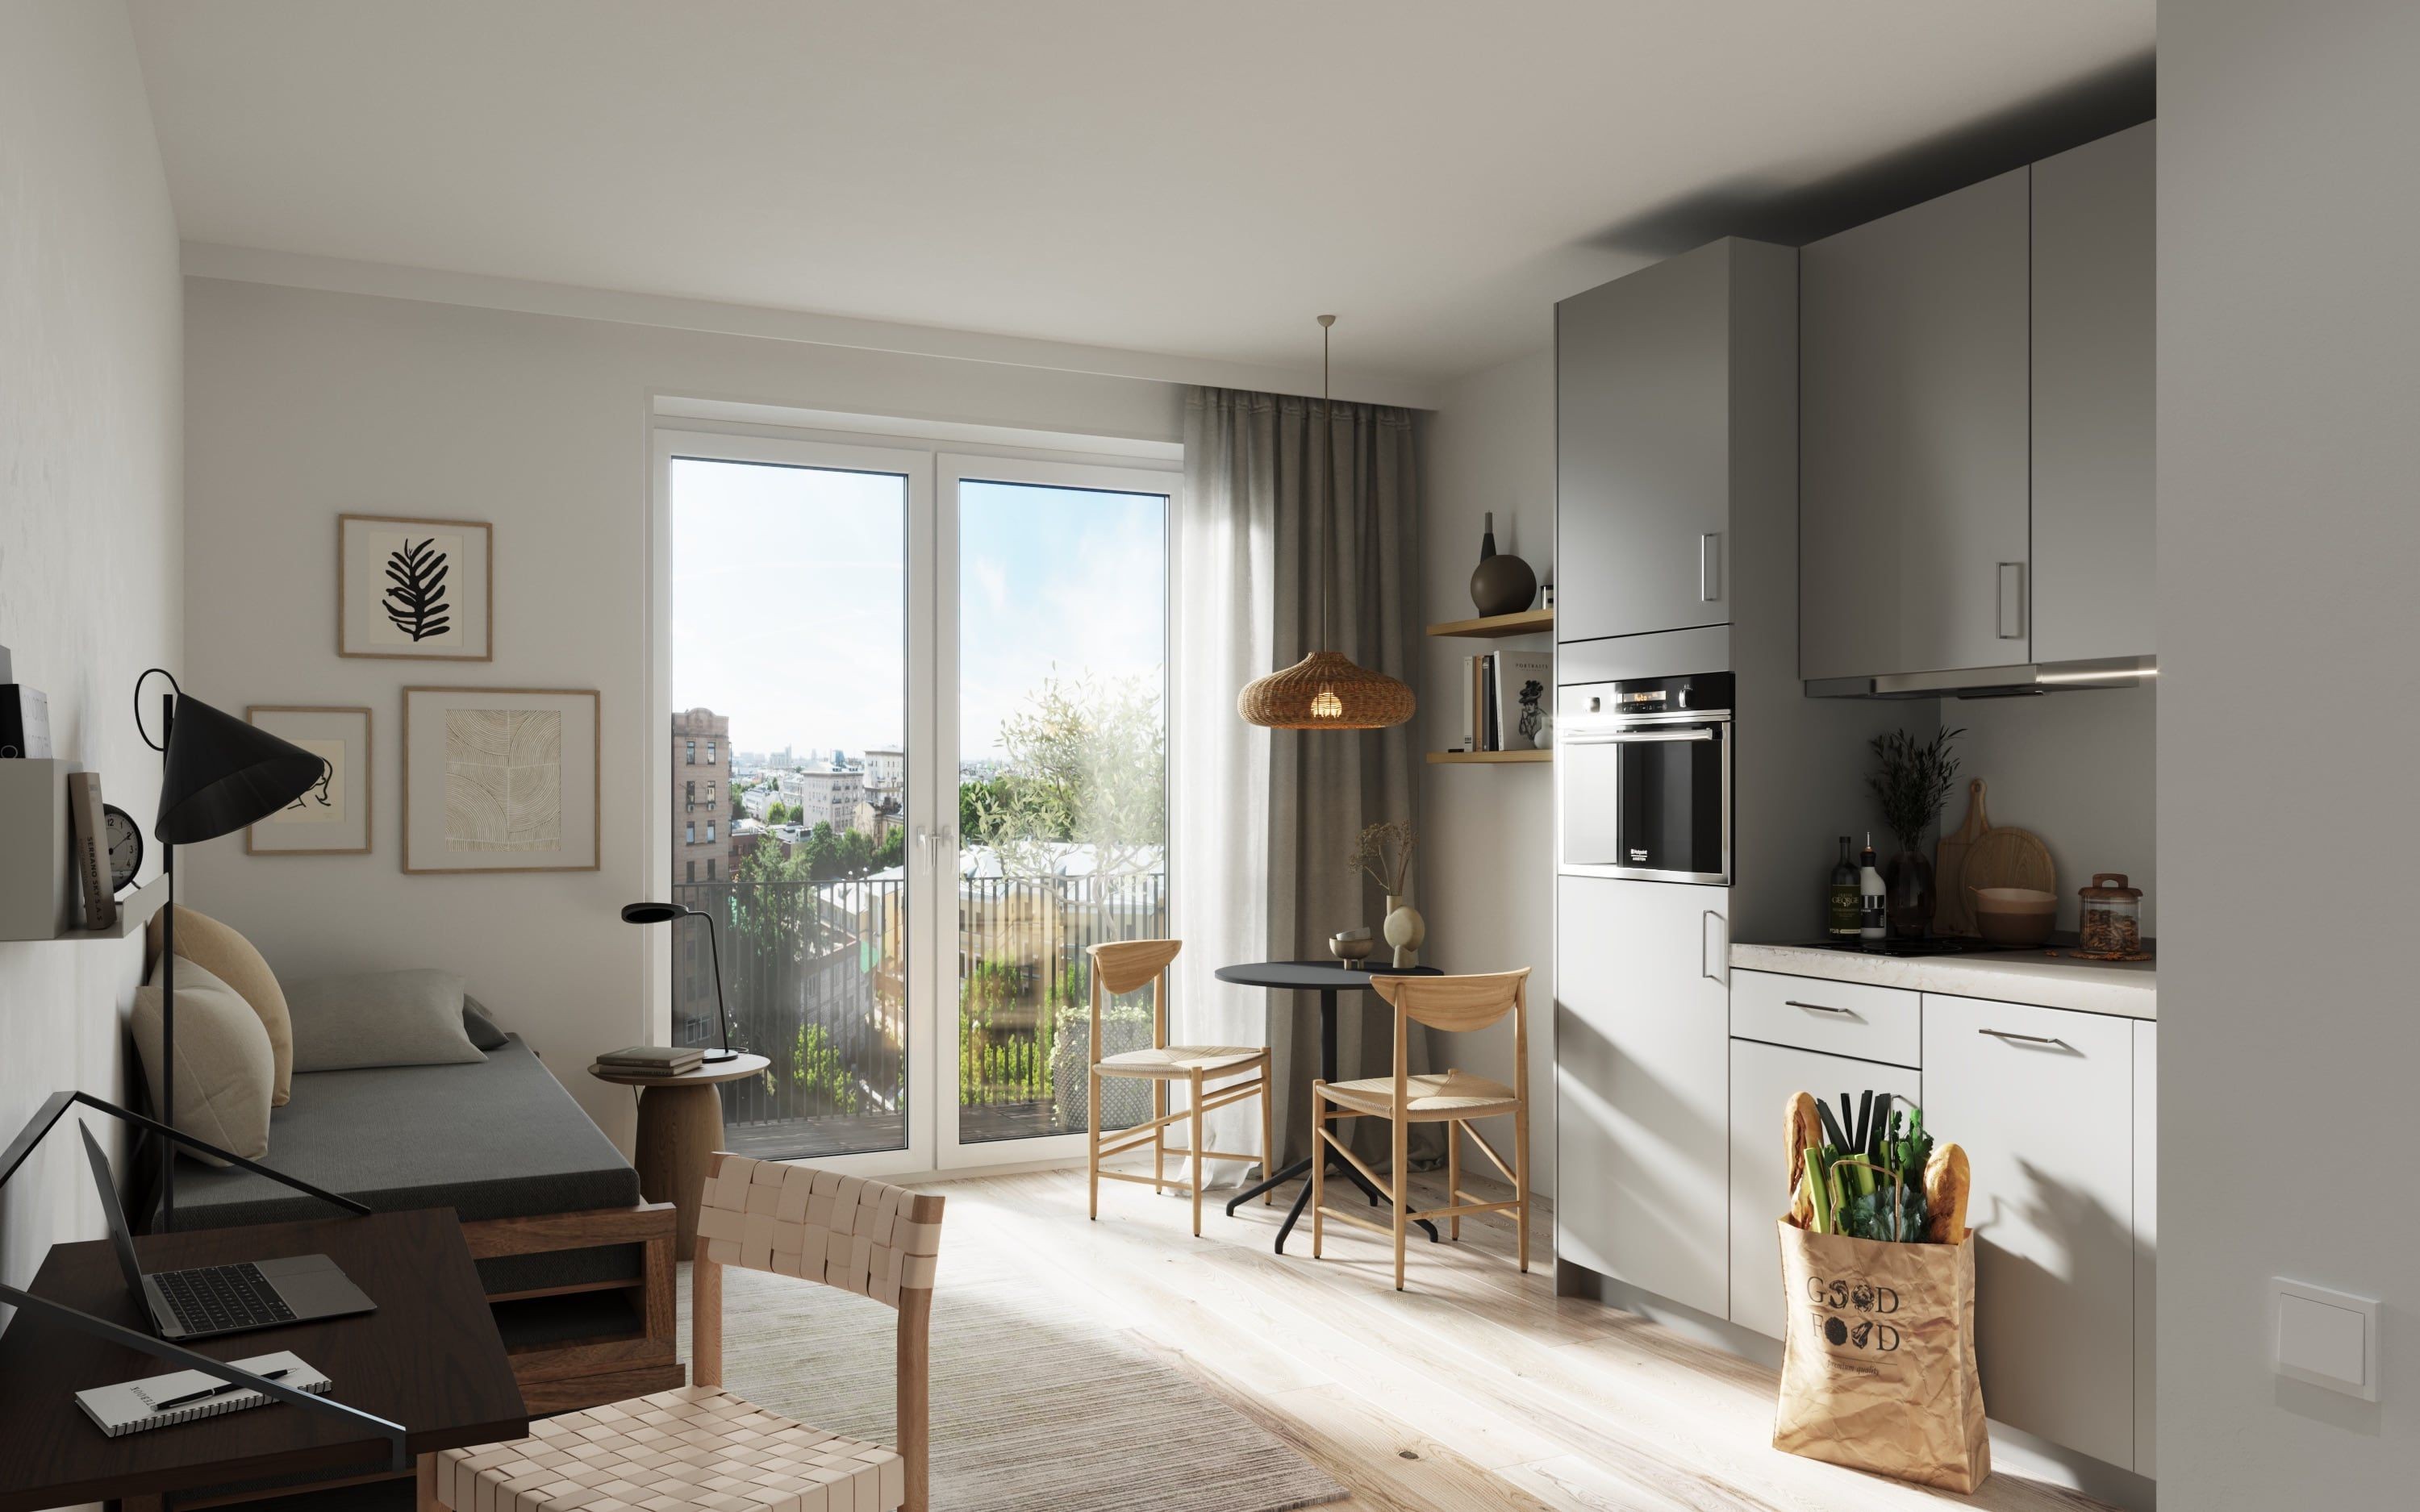 3D Interior Visualization of the small flat with kitchen and living room in Hamburg Eimsbüttel, Germany